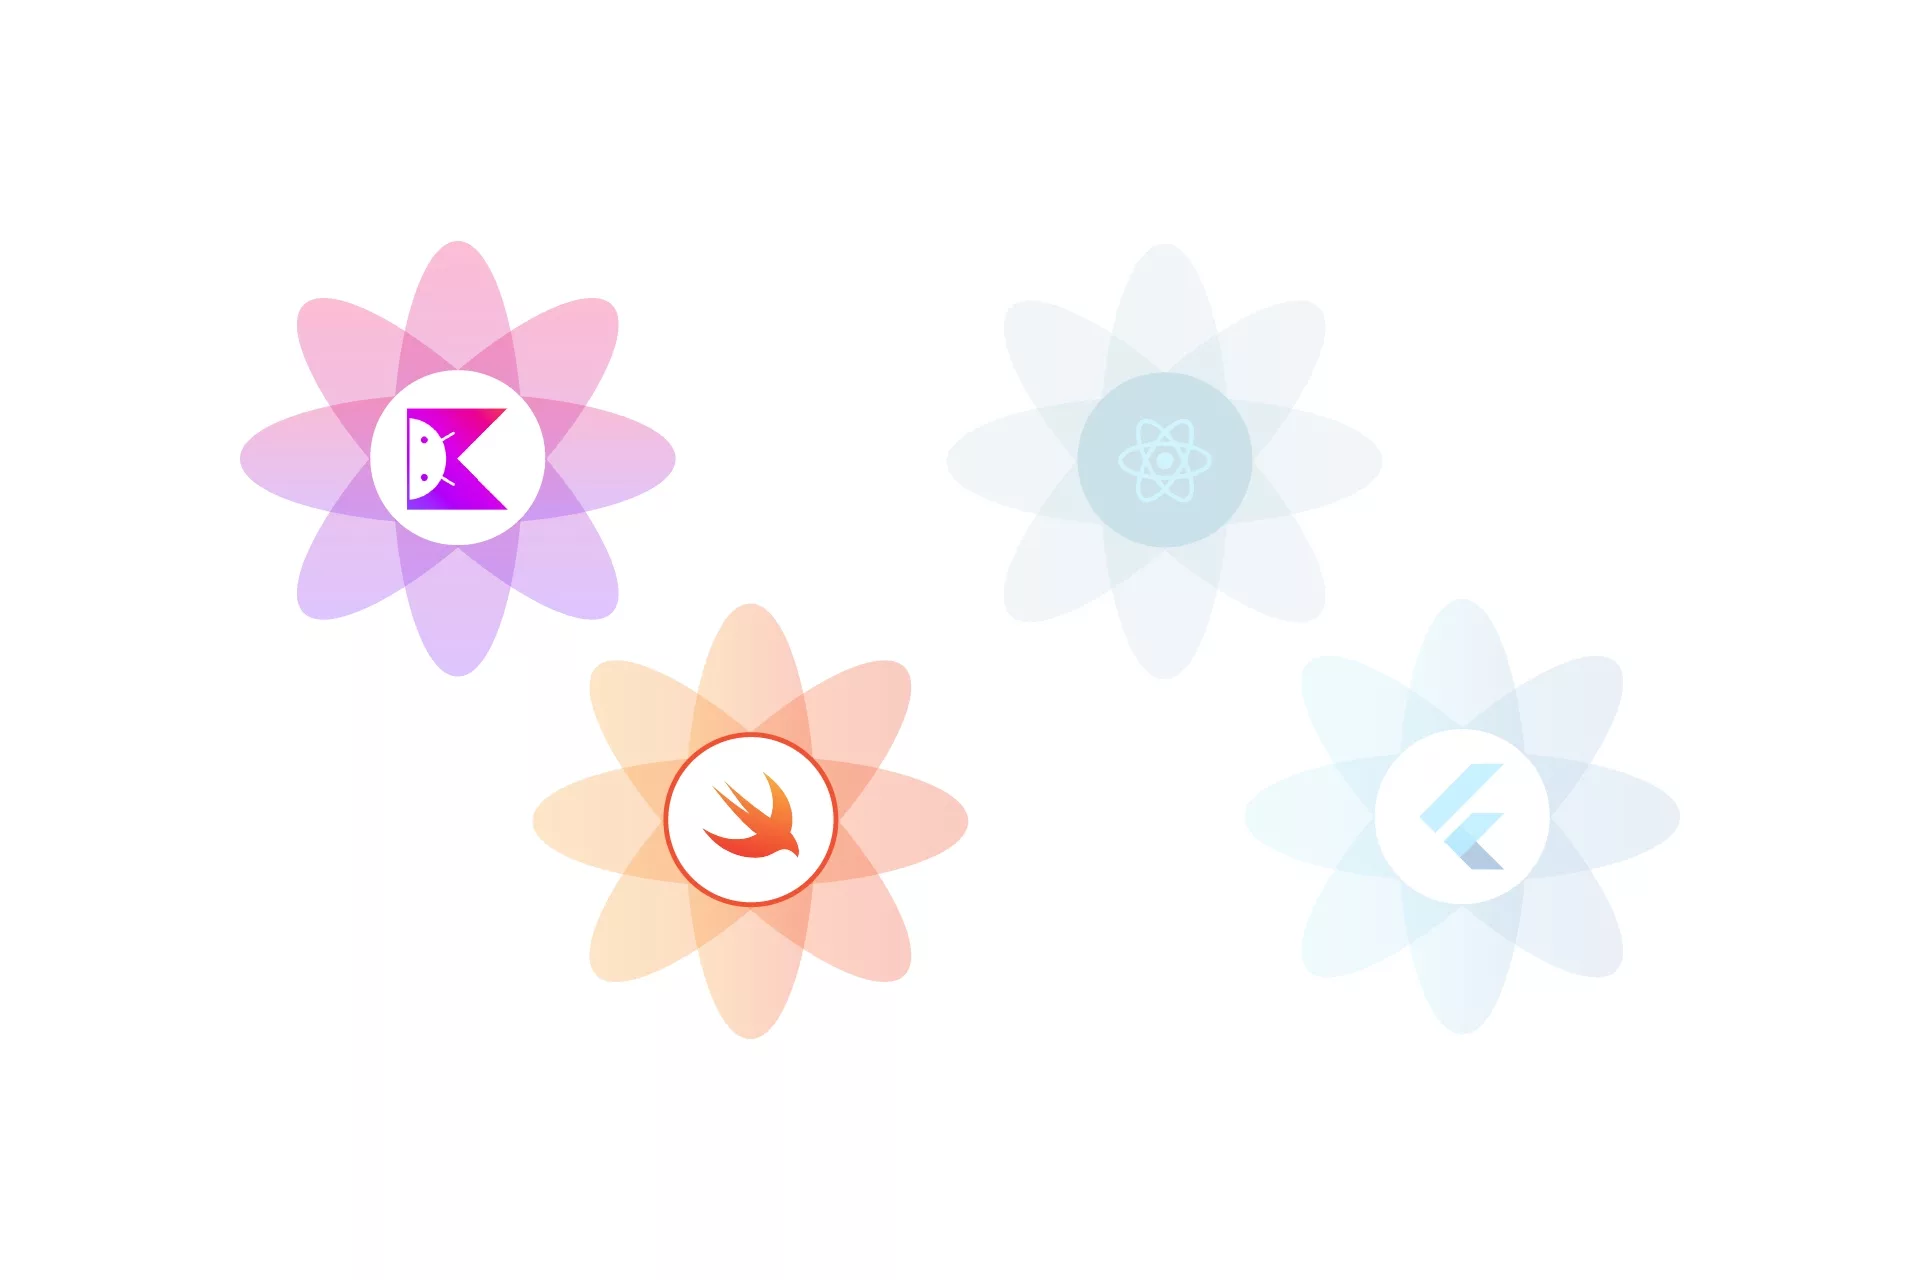 Four flowers that represent Kotlin, Swift, Flutter and React Native side by side. The Kotlin and Swift flowers can be seen clearly whilst the Flutter and React Native flowers have a slight transparency.